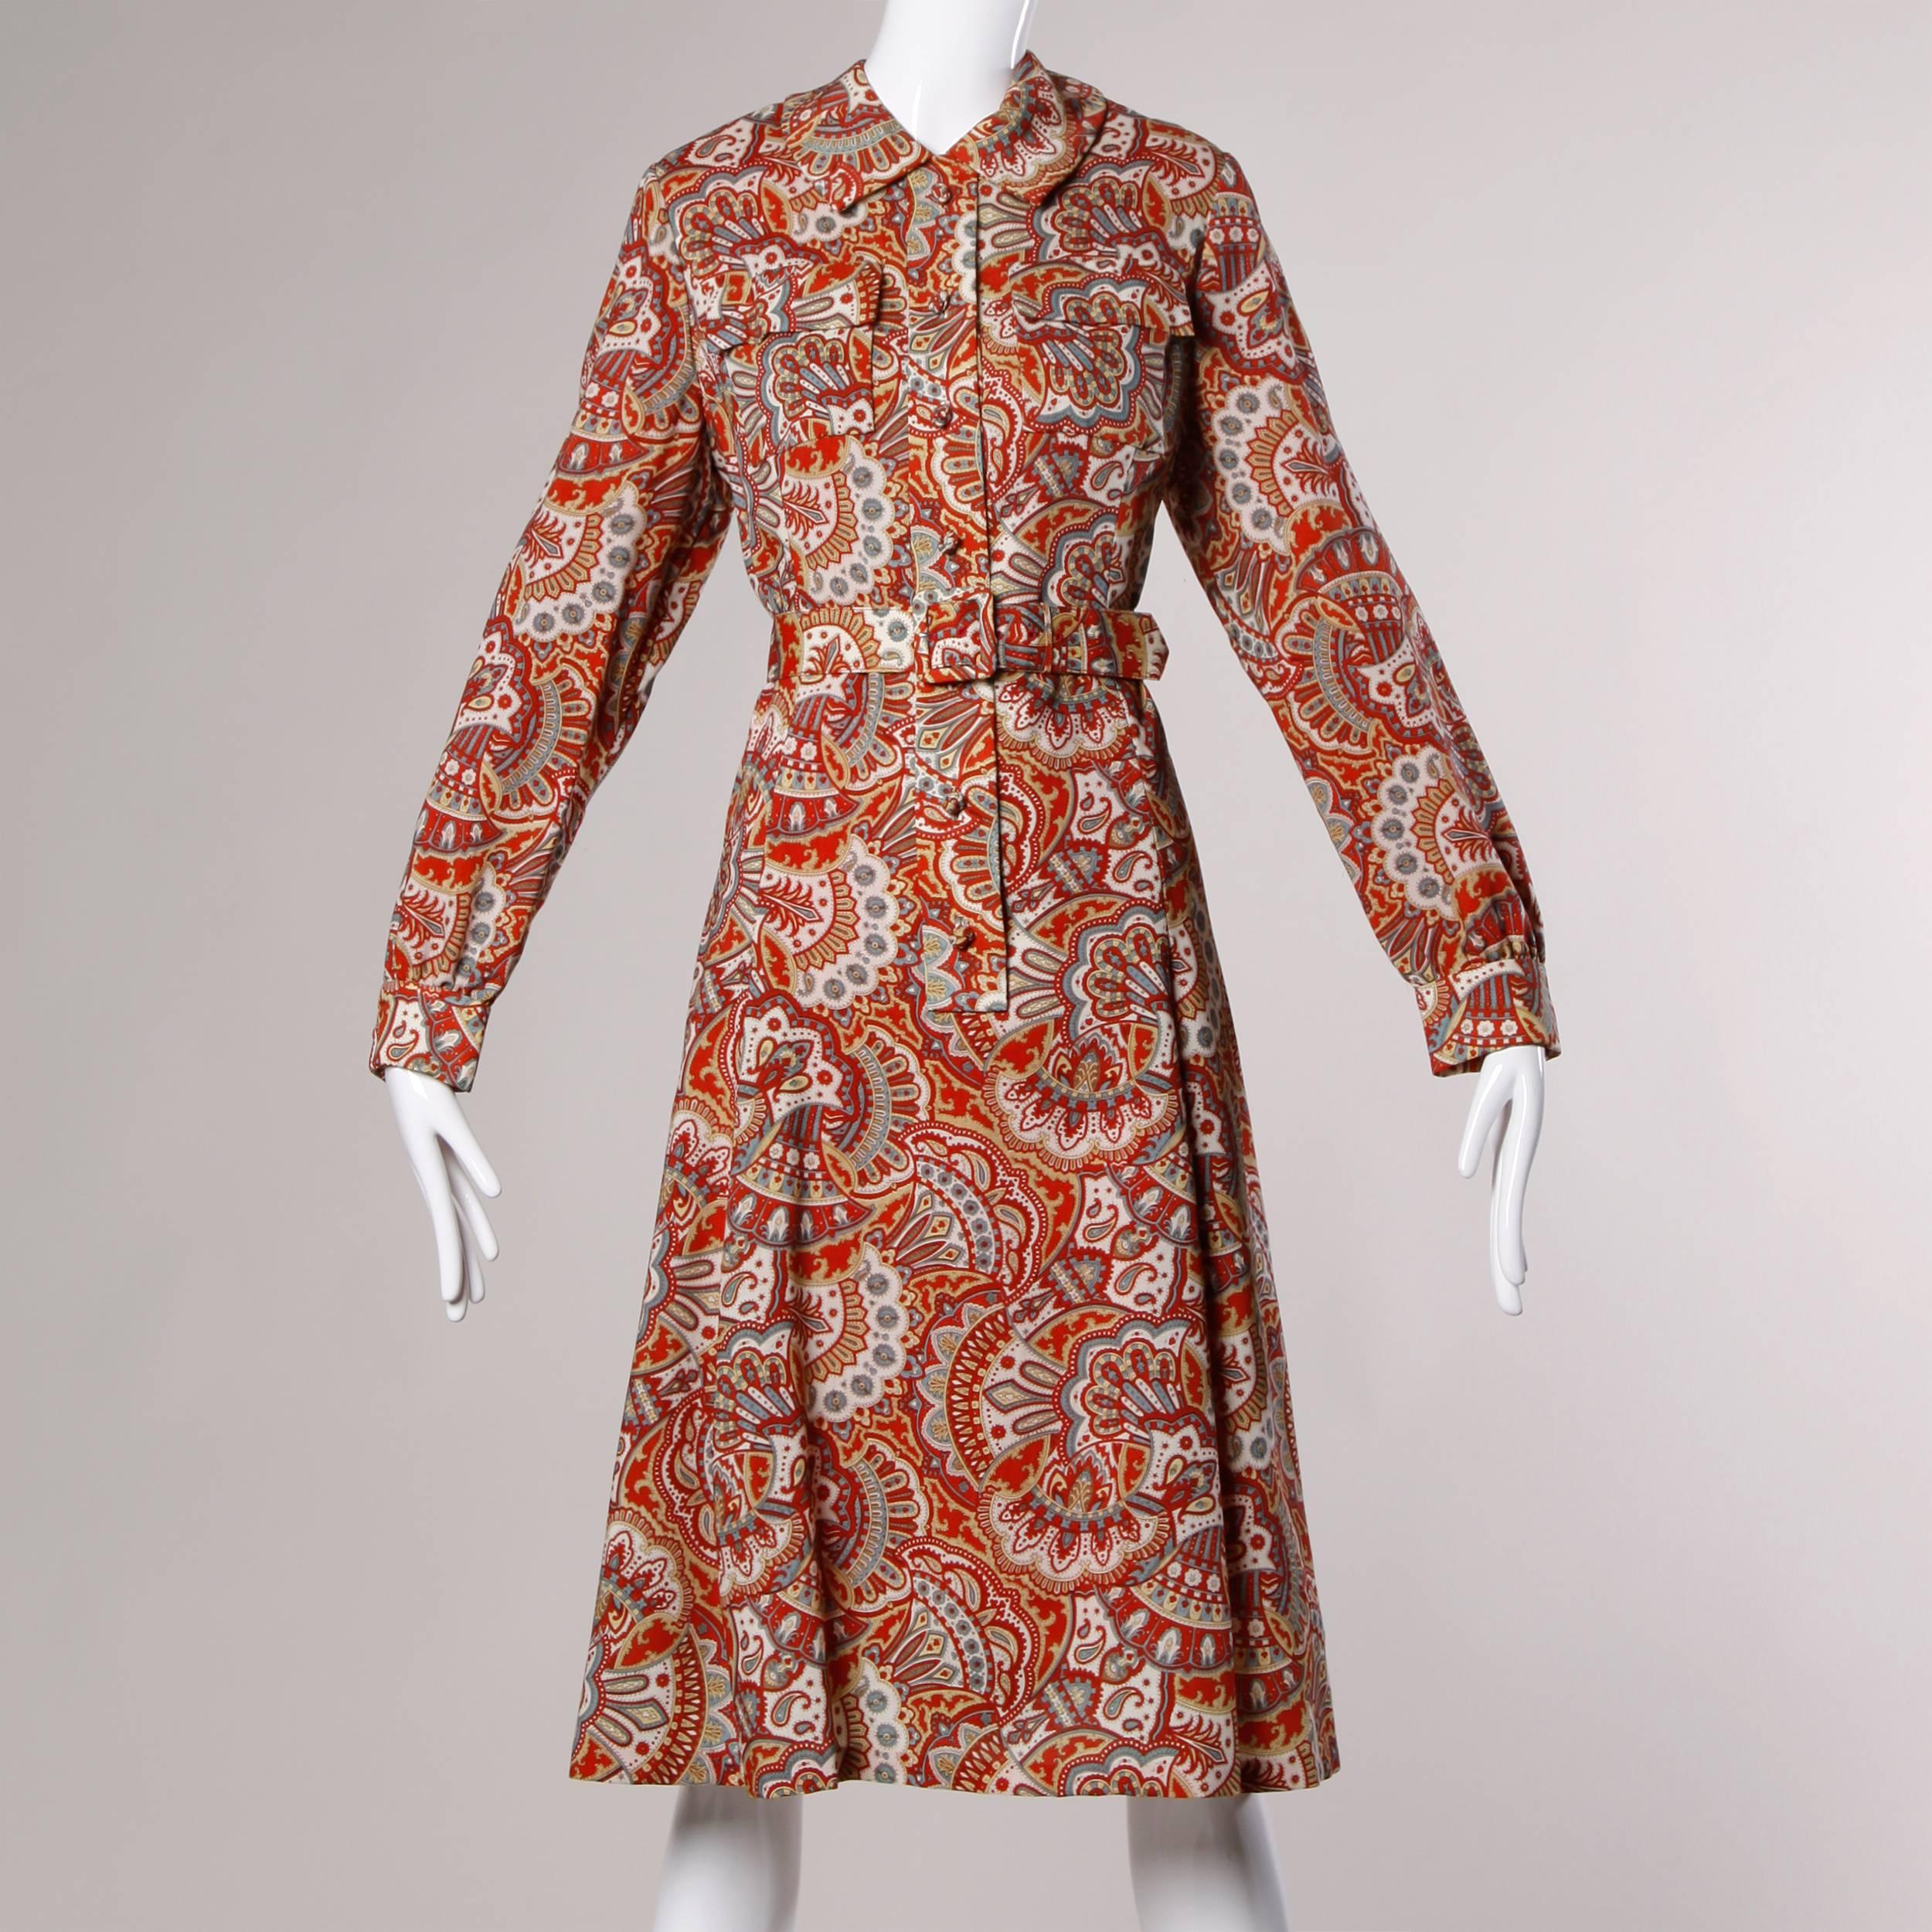 Paisley screen printed wool coat dress with matching belt by Casi. Gorgeous quality and construction.

Details:

Fully Lined
Front Pockets
Matching Belt
Front Button and Wrist Button Closure
Marked Size: Not Marked
Estimated Size: